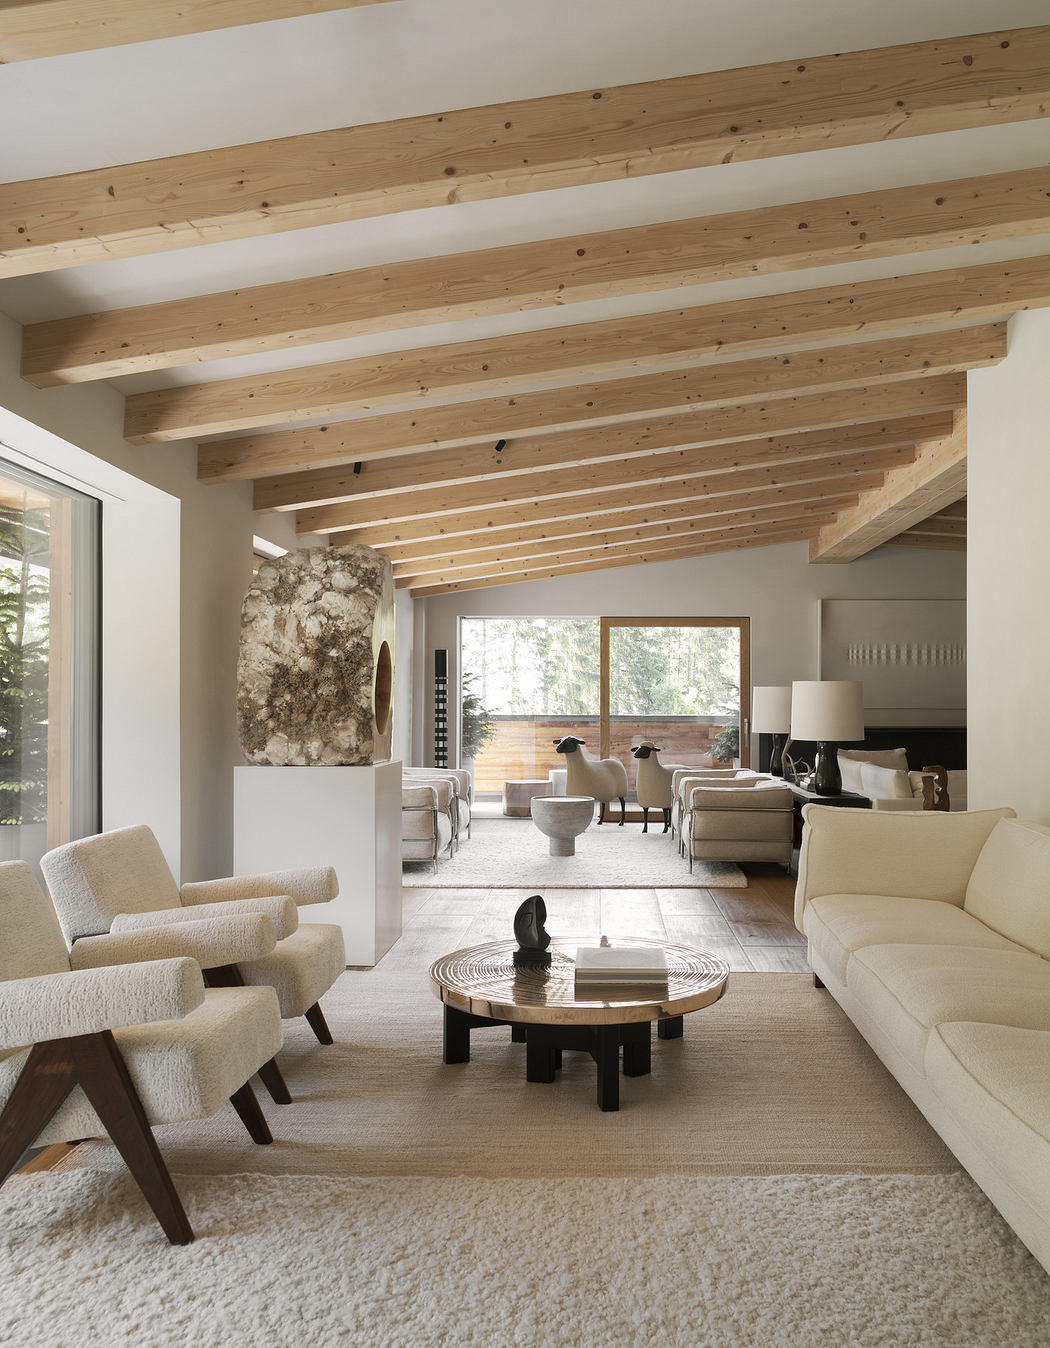 Modern living room with wooden ceiling beams, neutral tones, and minimalist decor.